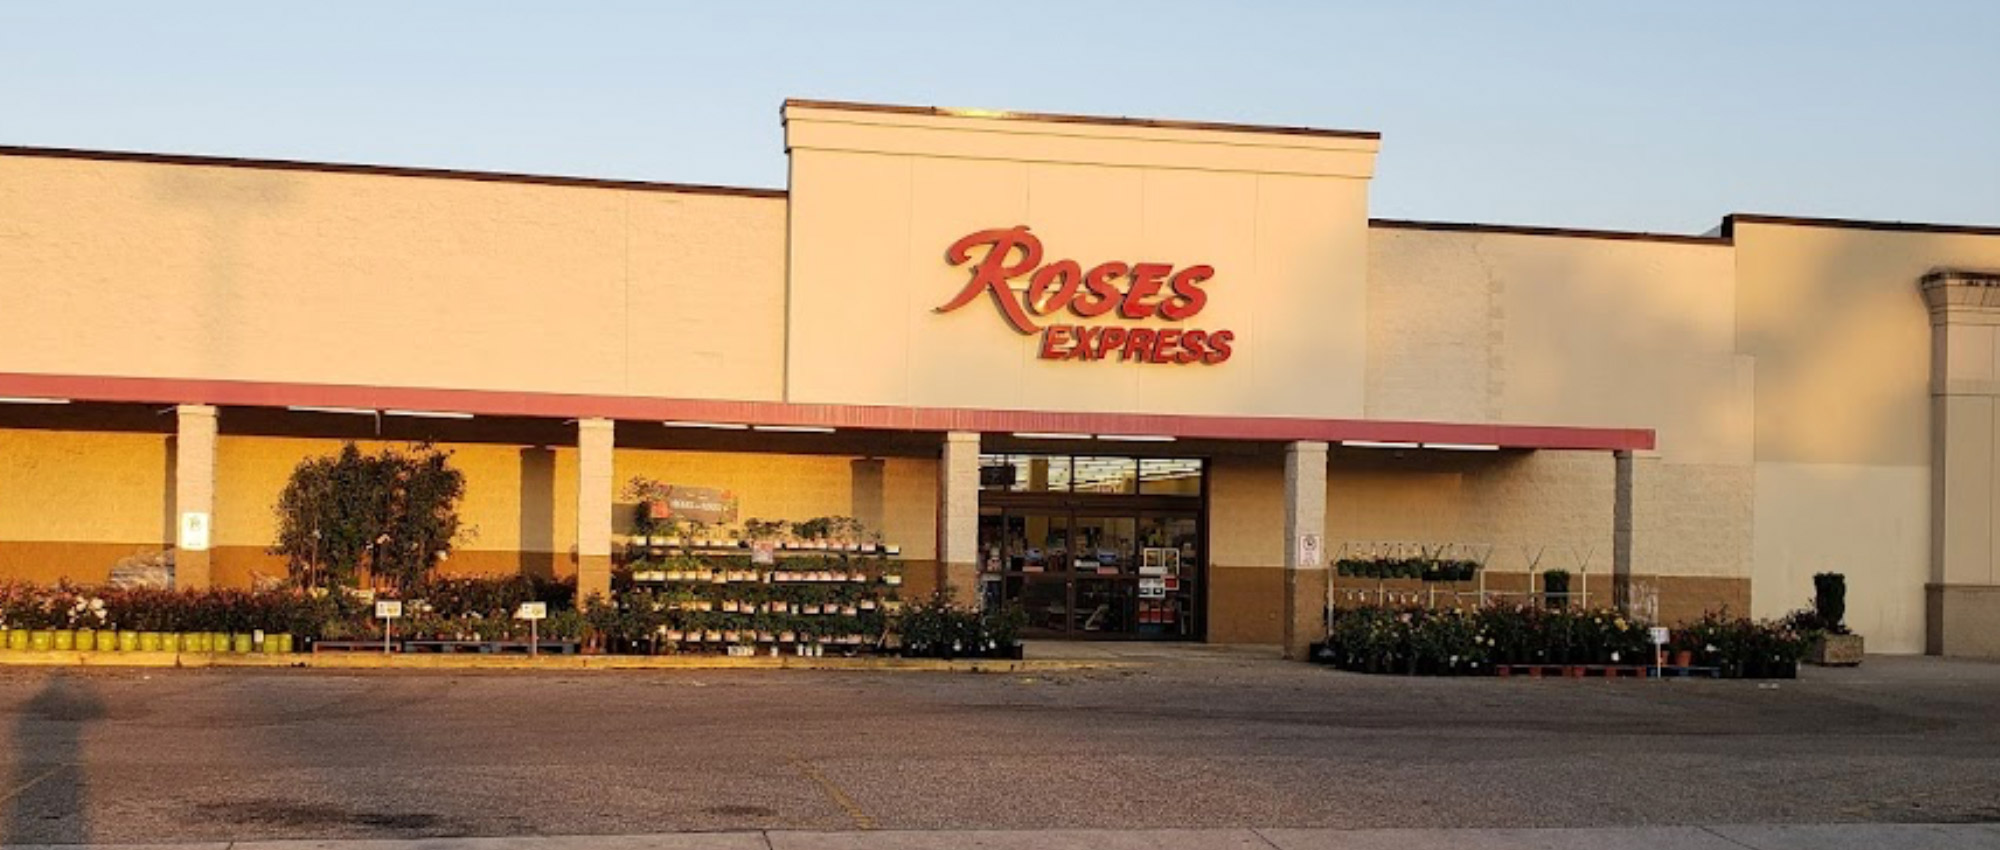 roses express store